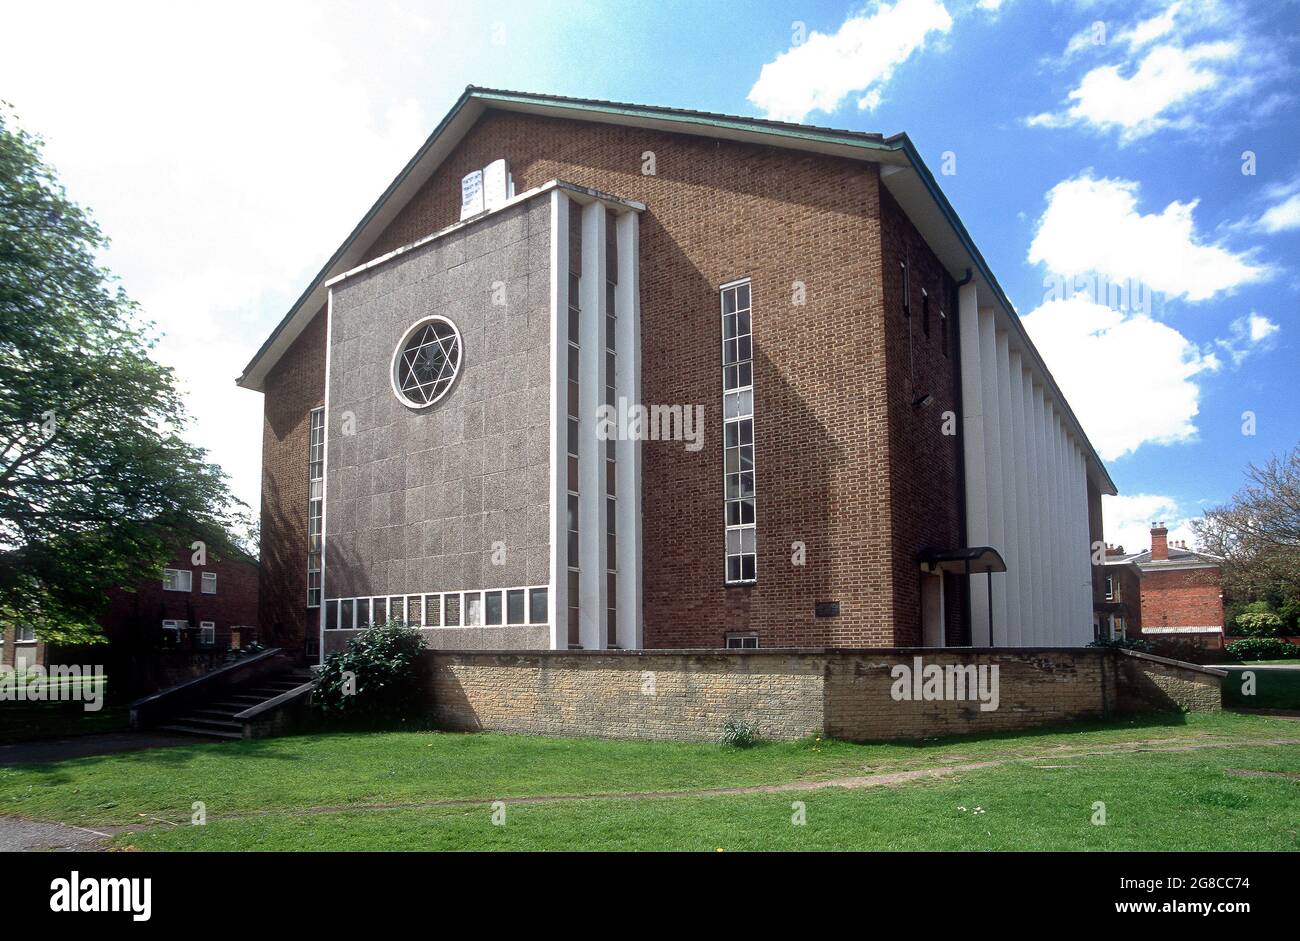 Completed by July 1956 The Central Synagogue  Pershore Road Birmingham taken a short while  before it was totally demolished by October 2013 to make way for a retirement home. The diminishing orthodox congregation moved into a refurbished and rebuilt function hall as a smaller place of worship that included a kosher food shop. Stock Photo